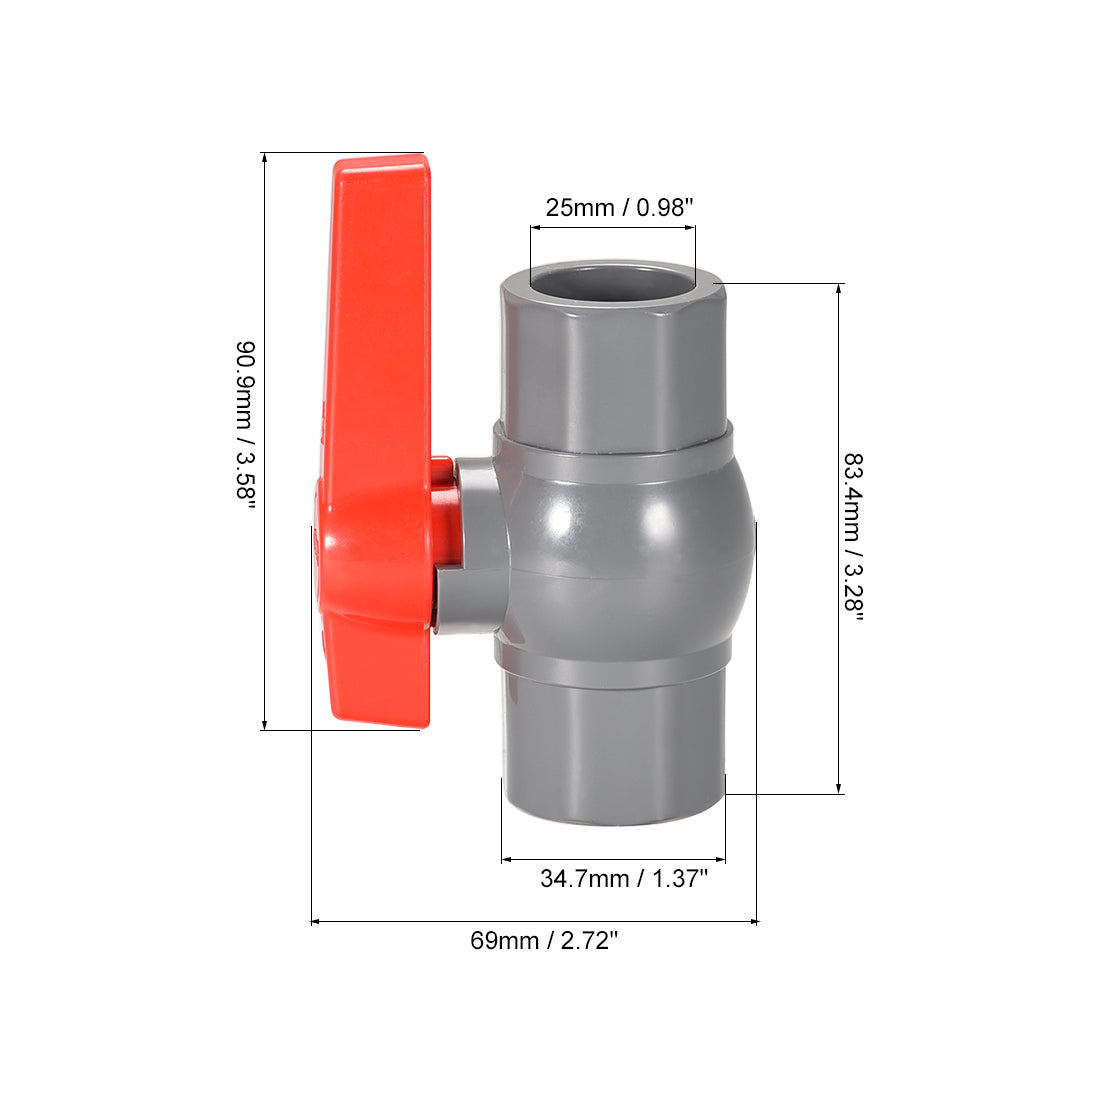 uxcell Uxcell Ball Valve, Socket Type, for Control Water Flow, PVC Grey 2Pcs